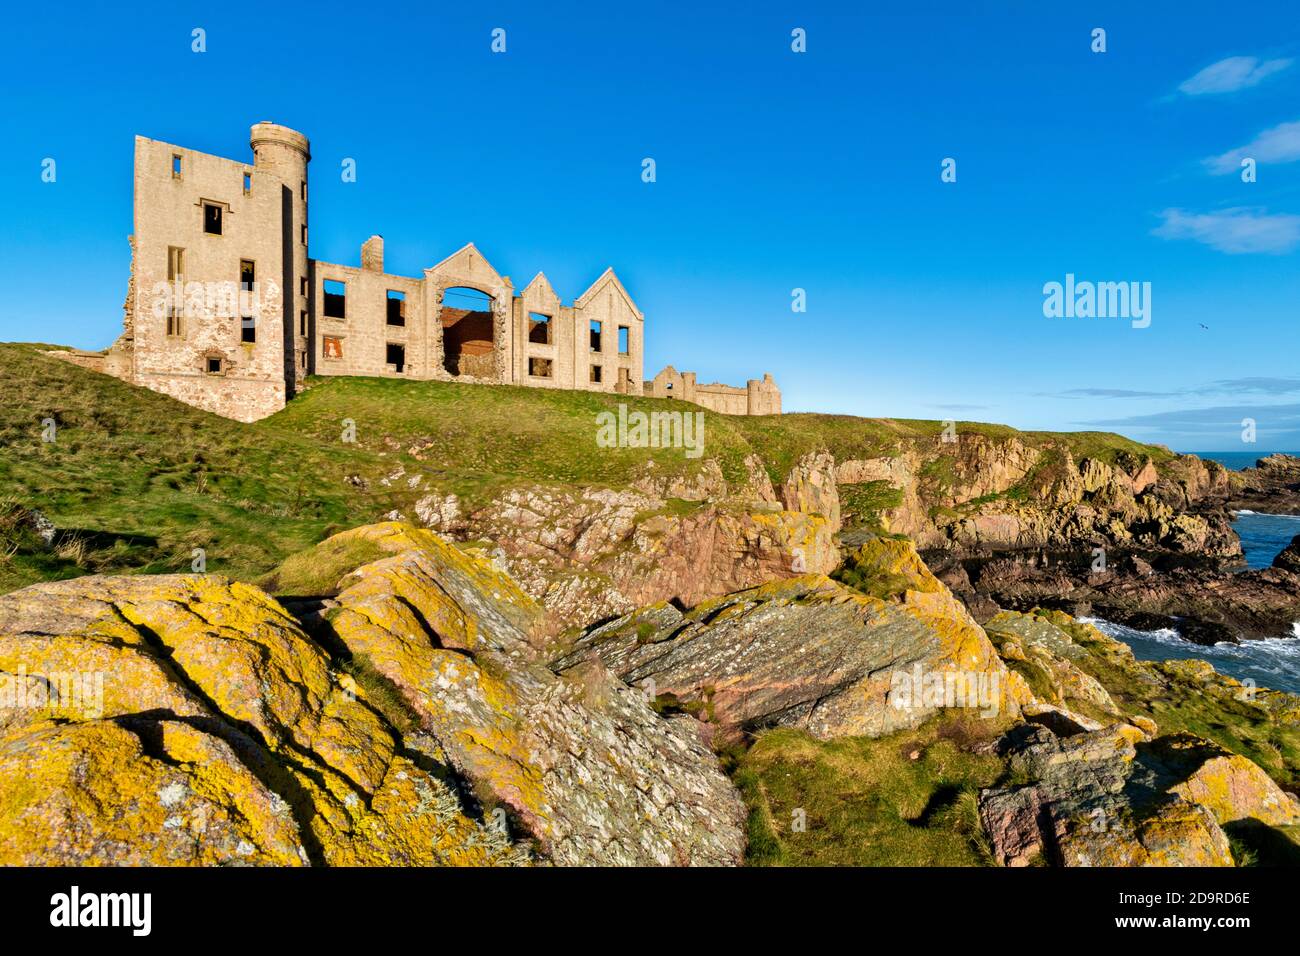 SLAINS CASTLE CRUDEN BAY ABERDEENSHIRE SCOTLAND HIGH ON THE RUGGED CLIFFS OVERLOOKING THE NORTH SEA Stock Photo